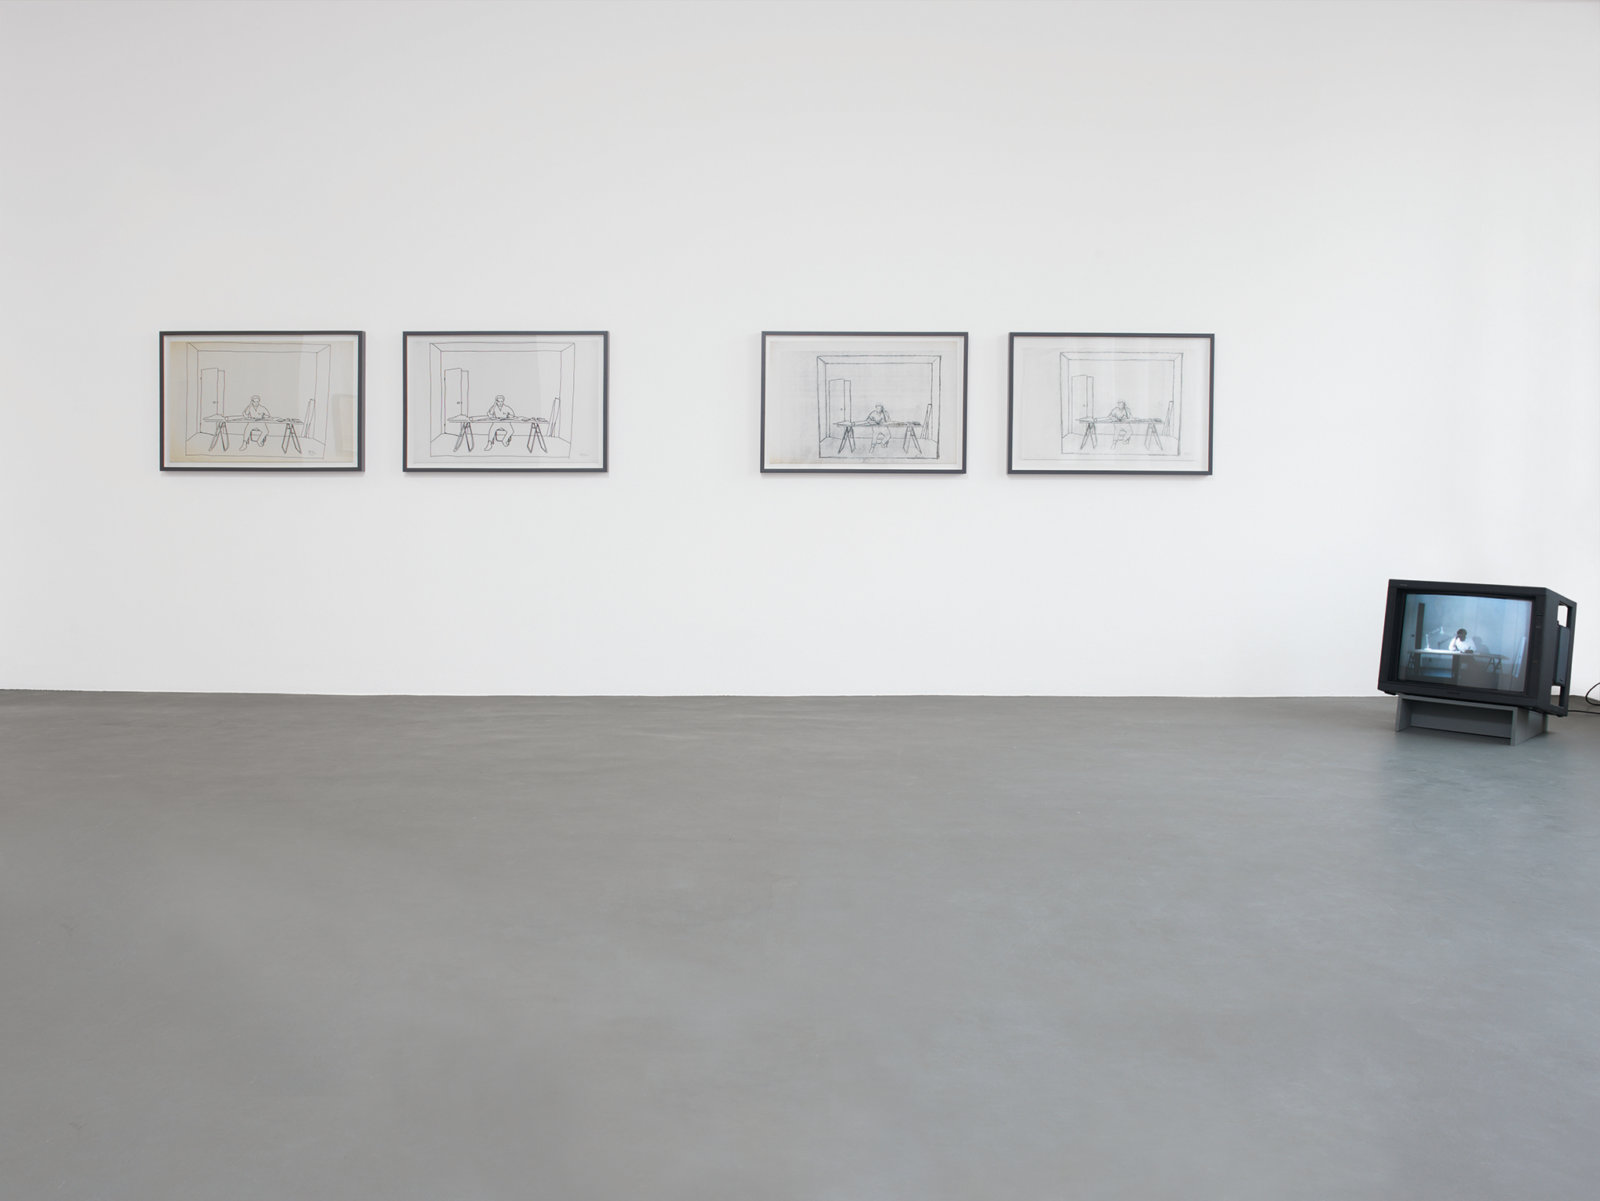 Ian Wallace, At Work 1983, 1983, installation, super 8mm film transferred to DVD, 6 minutes, 5 seconds, exhibition poster, silver gelatin print, backlit transparency, blueprints on paper and vellum, dimensions variable. Installation view, A Literature of Images, Witte de With, Rotterdam, 2008